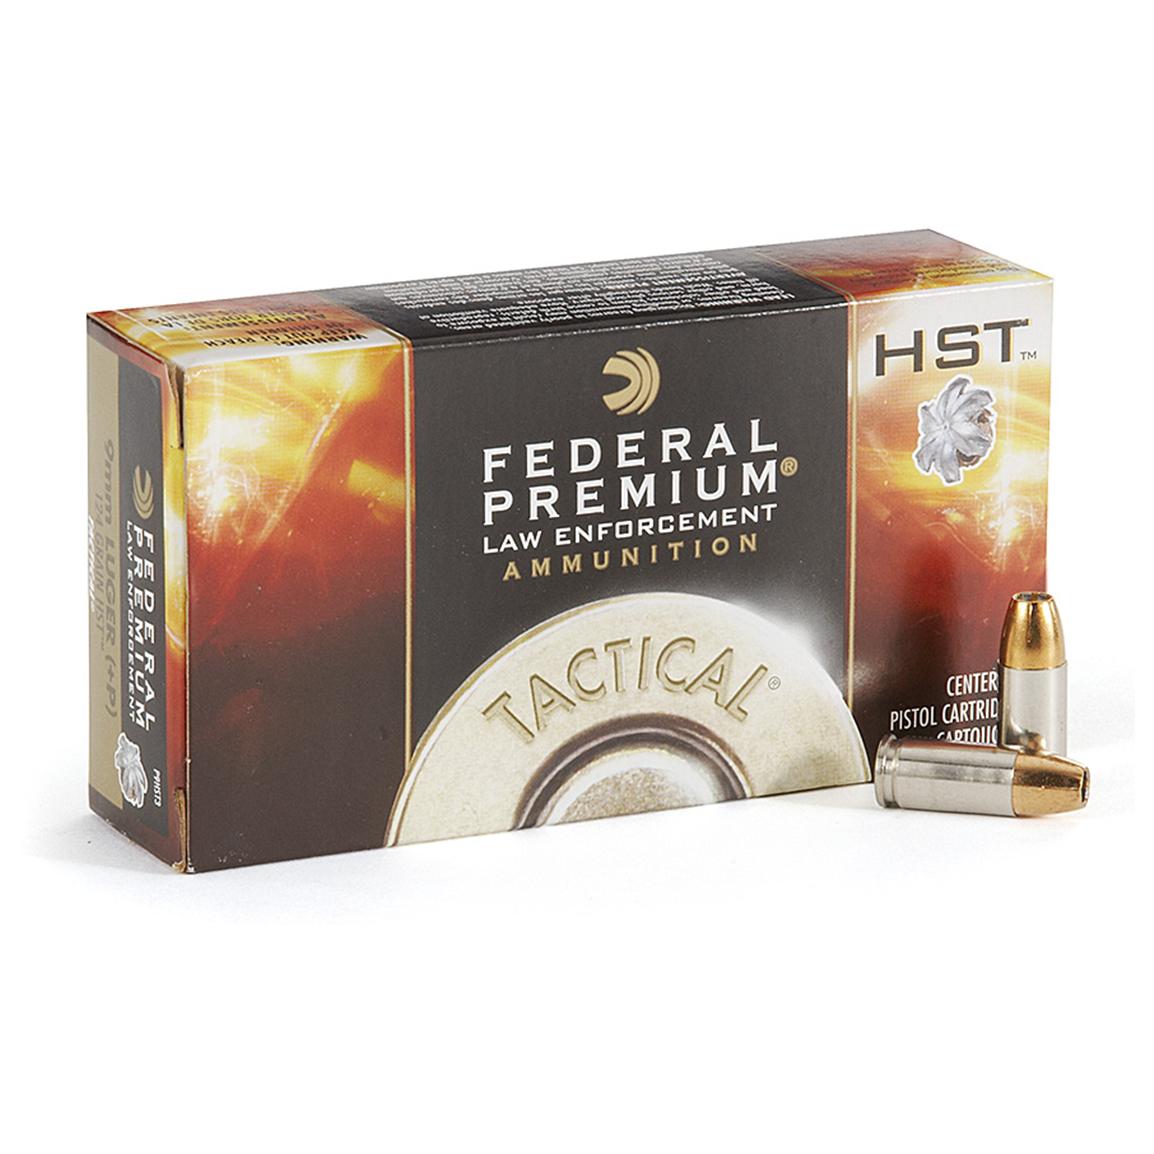 federal-9mm-p-hst-hp-124-grain-500-rounds-234100-9mm-ammo-at